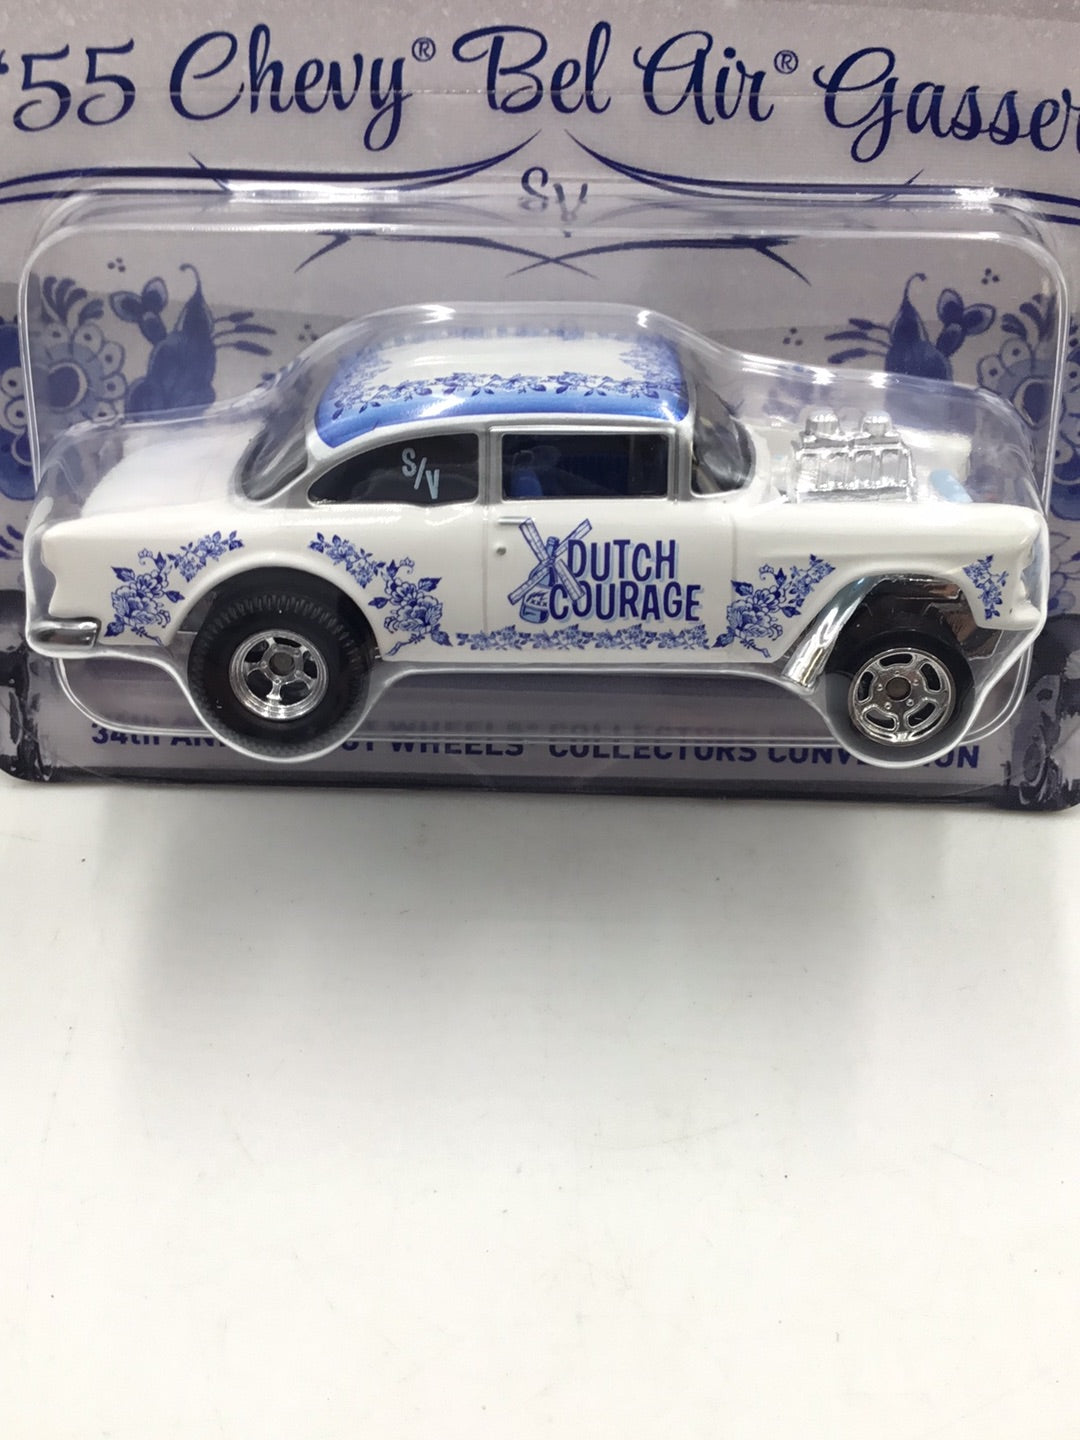 Hot wheels 1955 Chevy Gasser 2020 34nd annual Los Angeles collectors  Convention #5445 of 5500 with protector